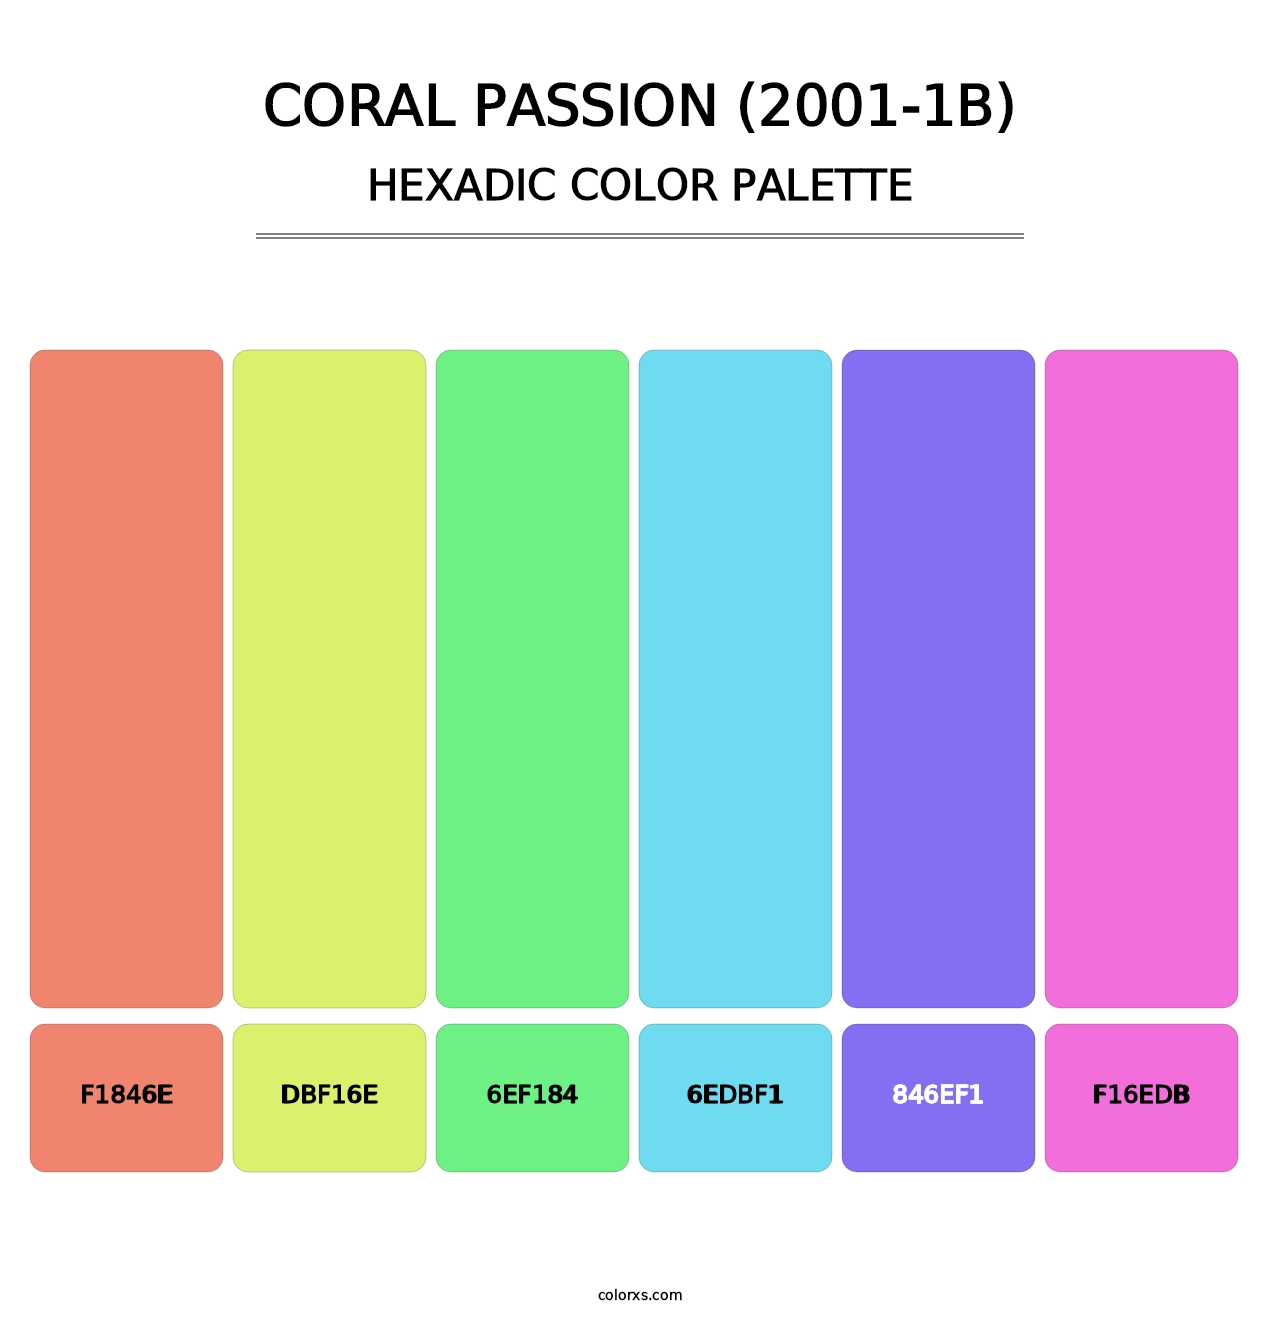 Coral Passion (2001-1B) - Hexadic Color Palette